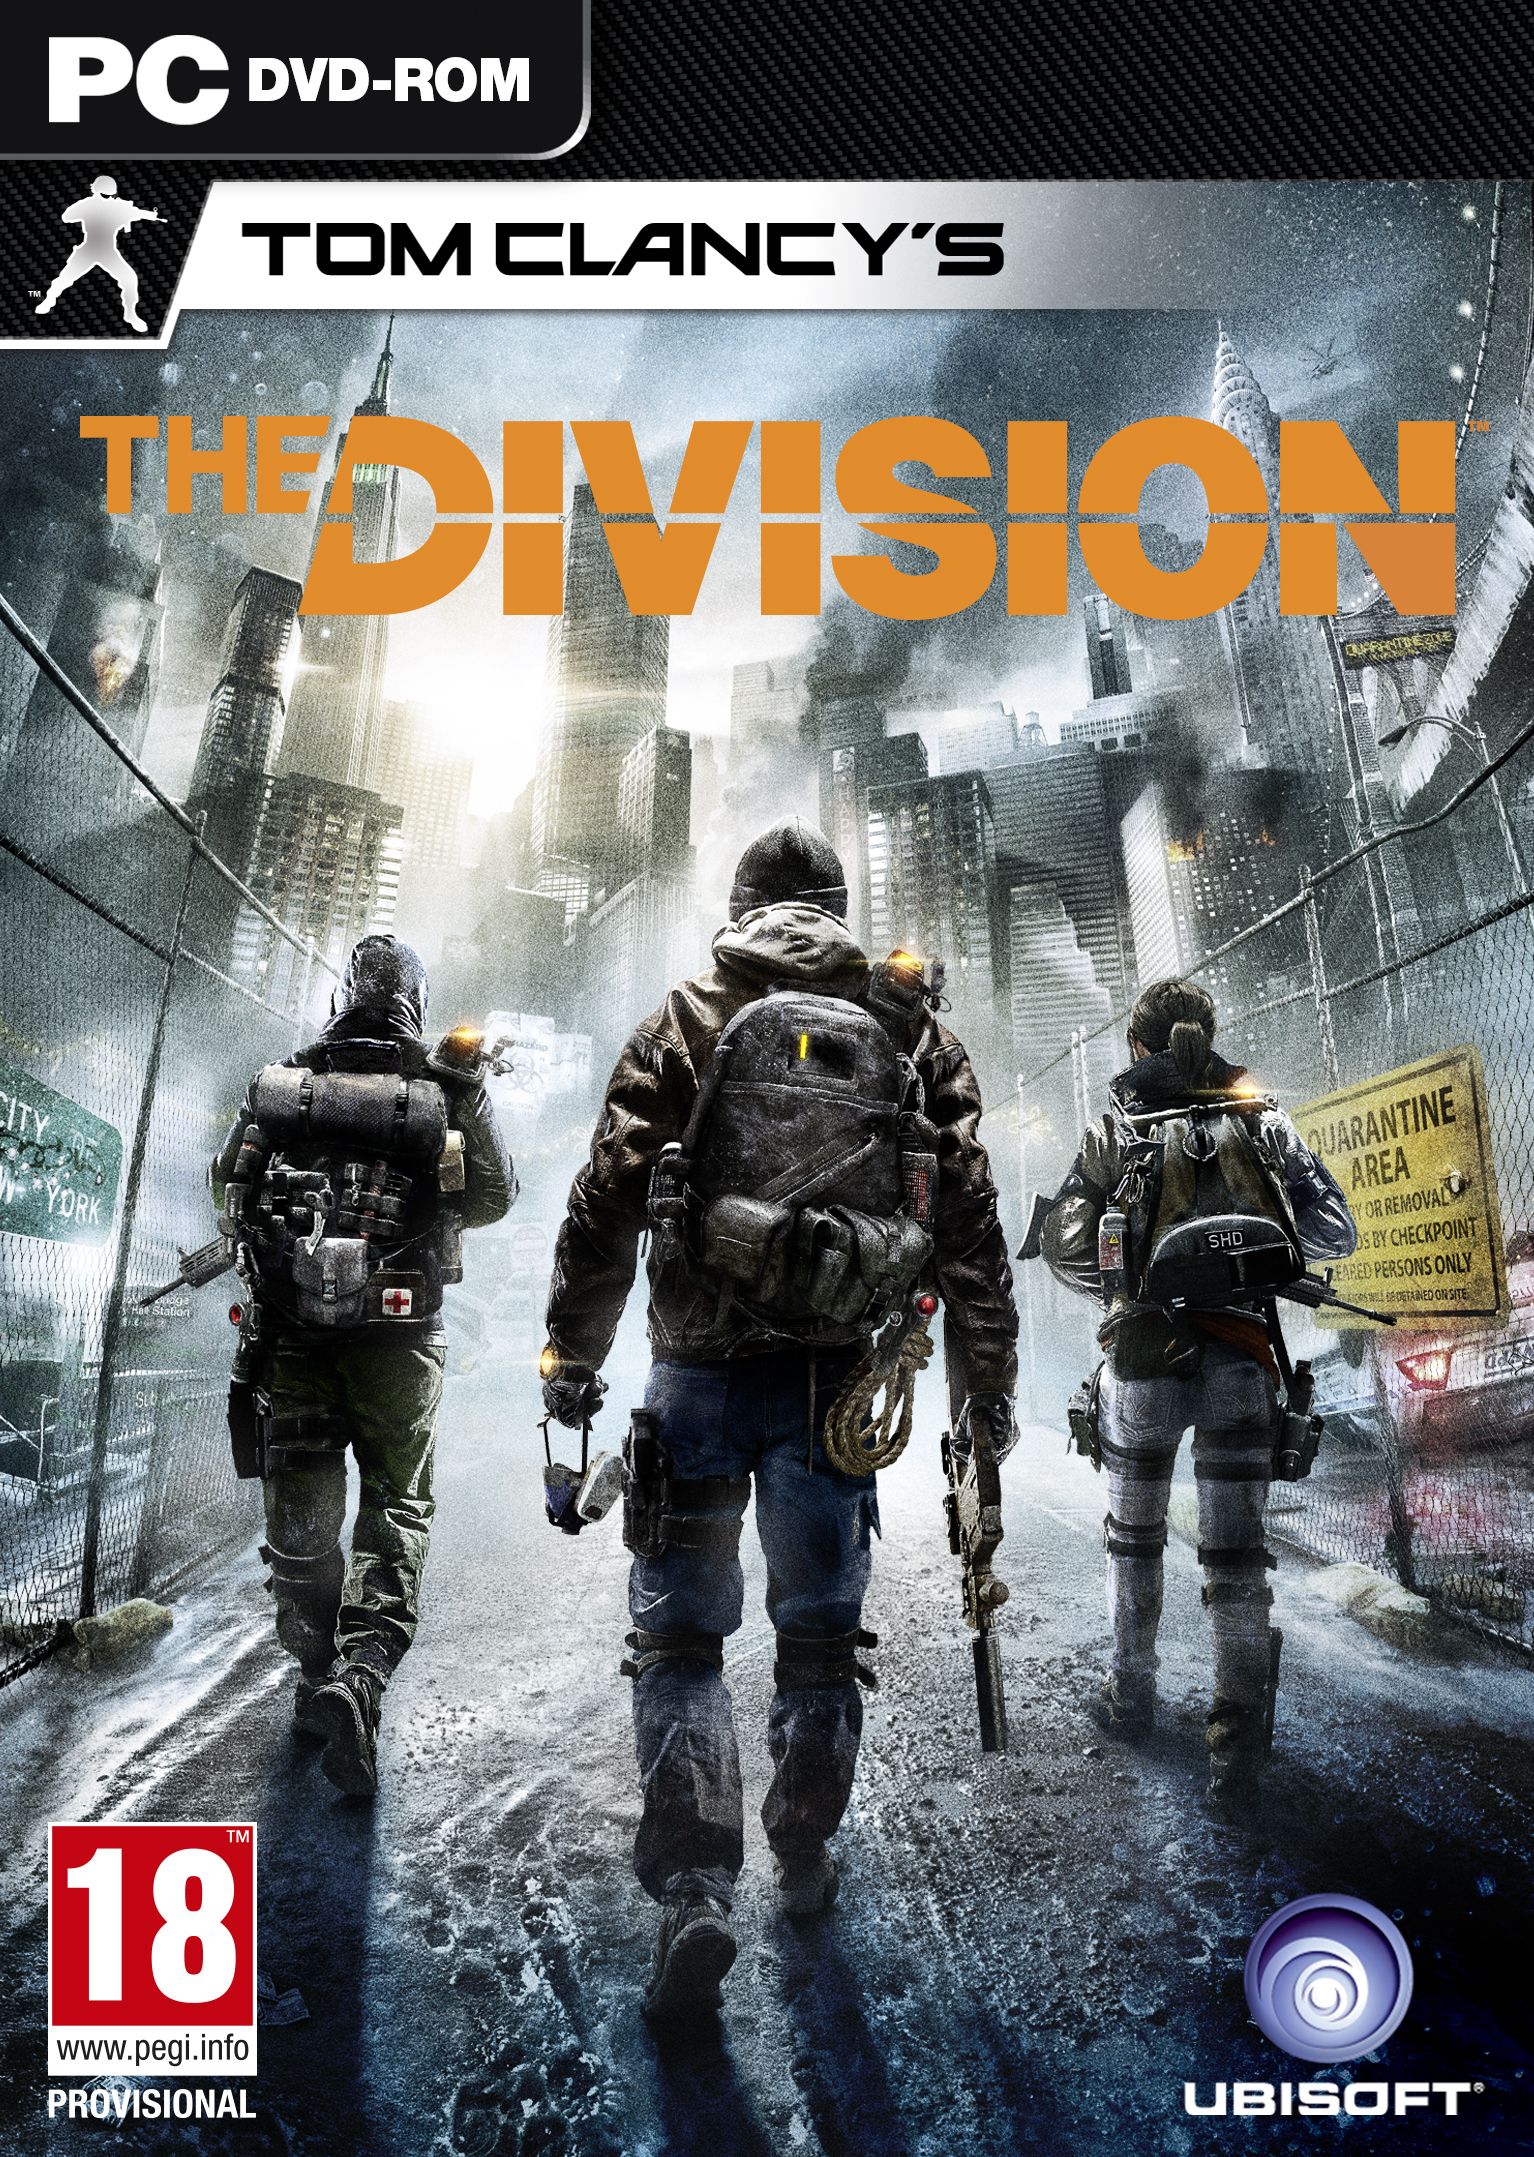 Tom Clancy's The Division (PC), Ubisoft